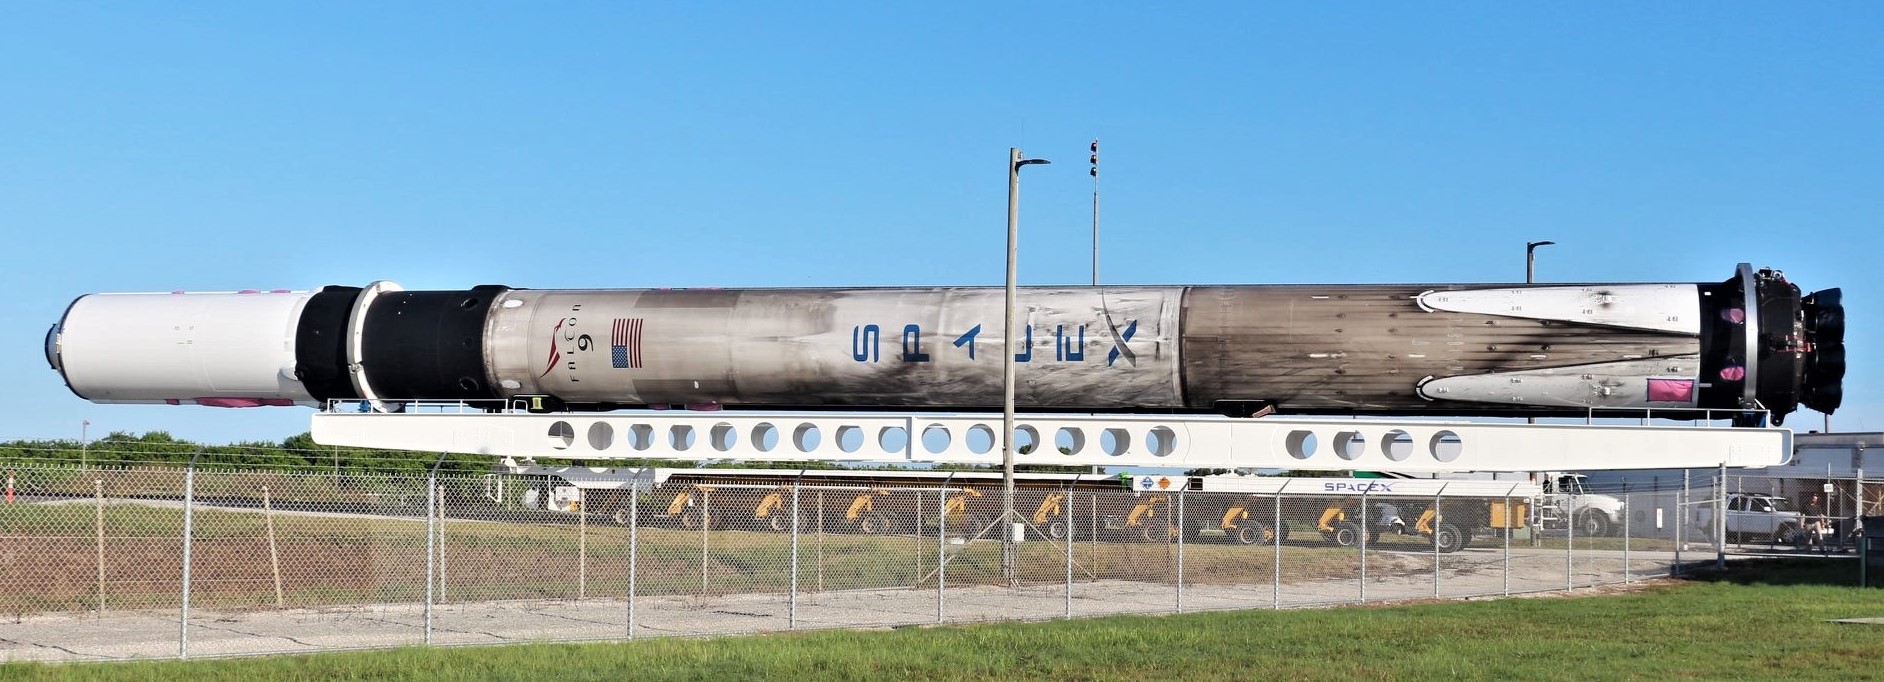 AMOS-17 Falcon 9 B1047 transport 39A LC-40 072819 (Spacecom – SpaceX) 2 edit